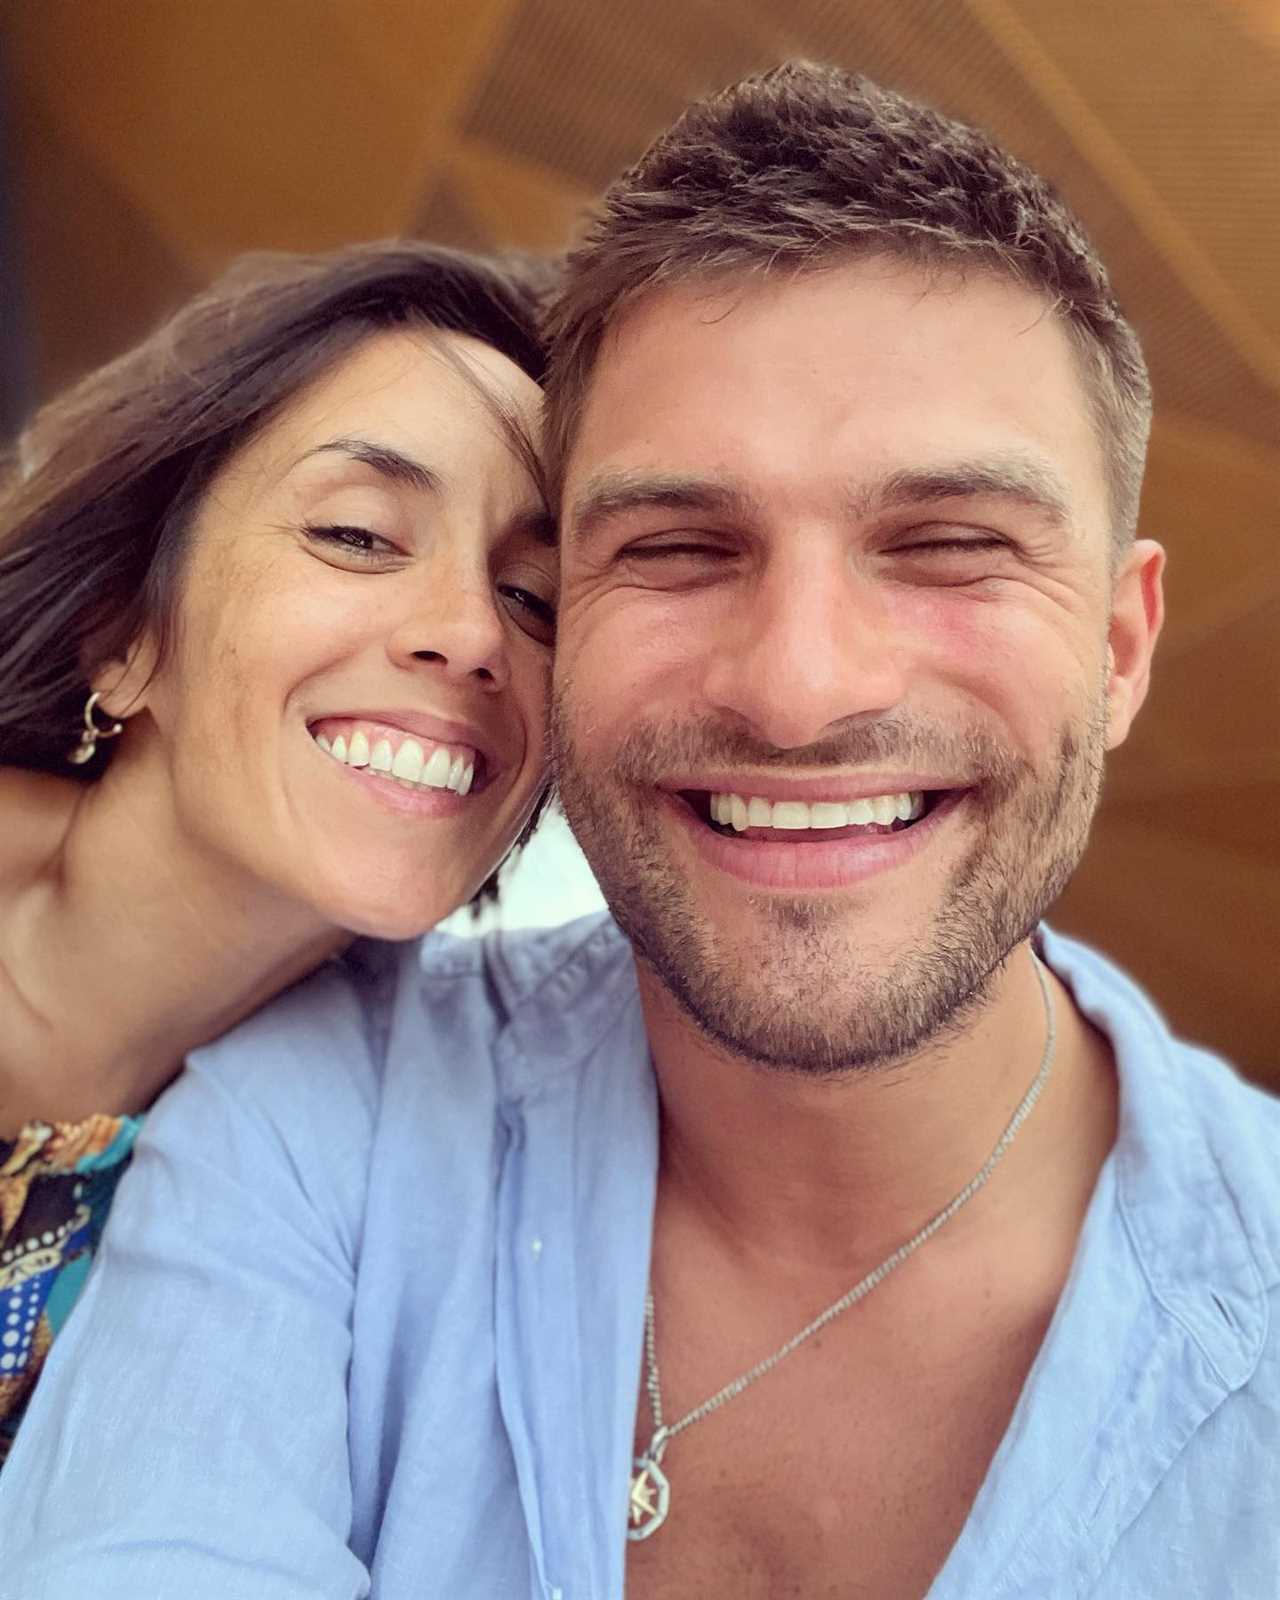 Strictly couple Janette Manrara and Aljaz Skorjanec reveal they’re having their first baby after pregnancy struggles